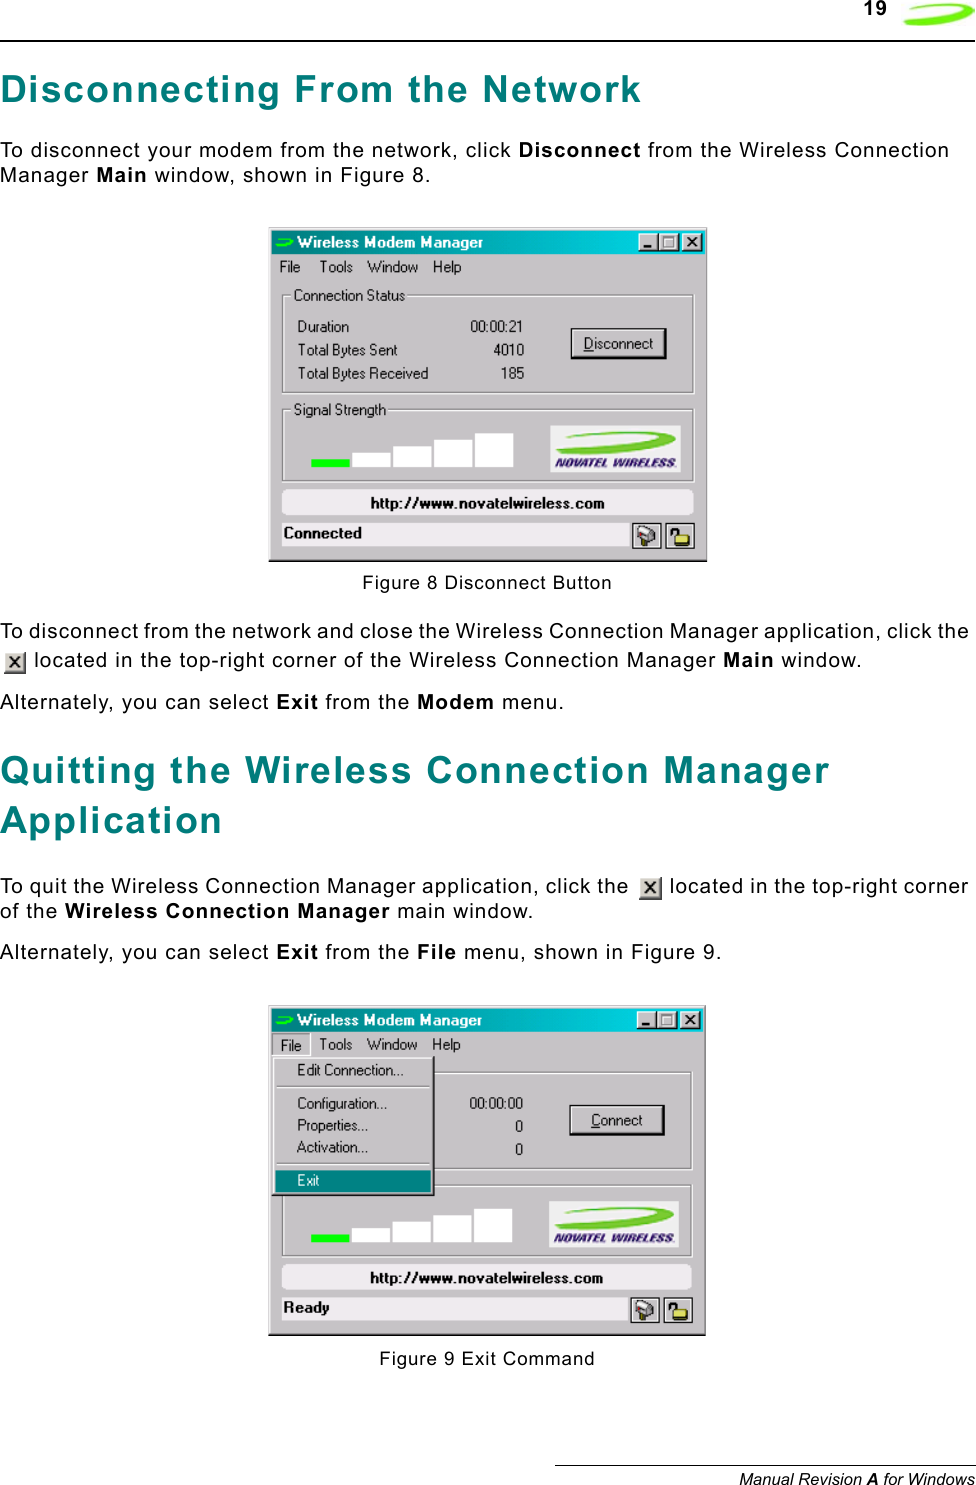    19Manual Revision A for WindowsDisconnecting From the NetworkTo disconnect your modem from the network, click Disconnect from the Wireless Connection Manager Main window, shown in Figure 8.Figure 8 Disconnect ButtonTo disconnect from the network and close the Wireless Connection Manager application, click the  located in the top-right corner of the Wireless Connection Manager Main window.Alternately, you can select Exit from the Modem menu.Quitting the Wireless Connection Manager ApplicationTo quit the Wireless Connection Manager application, click the   located in the top-right corner of the Wireless Connection Manager main window.Alternately, you can select Exit from the File menu, shown in Figure 9.Figure 9 Exit Command